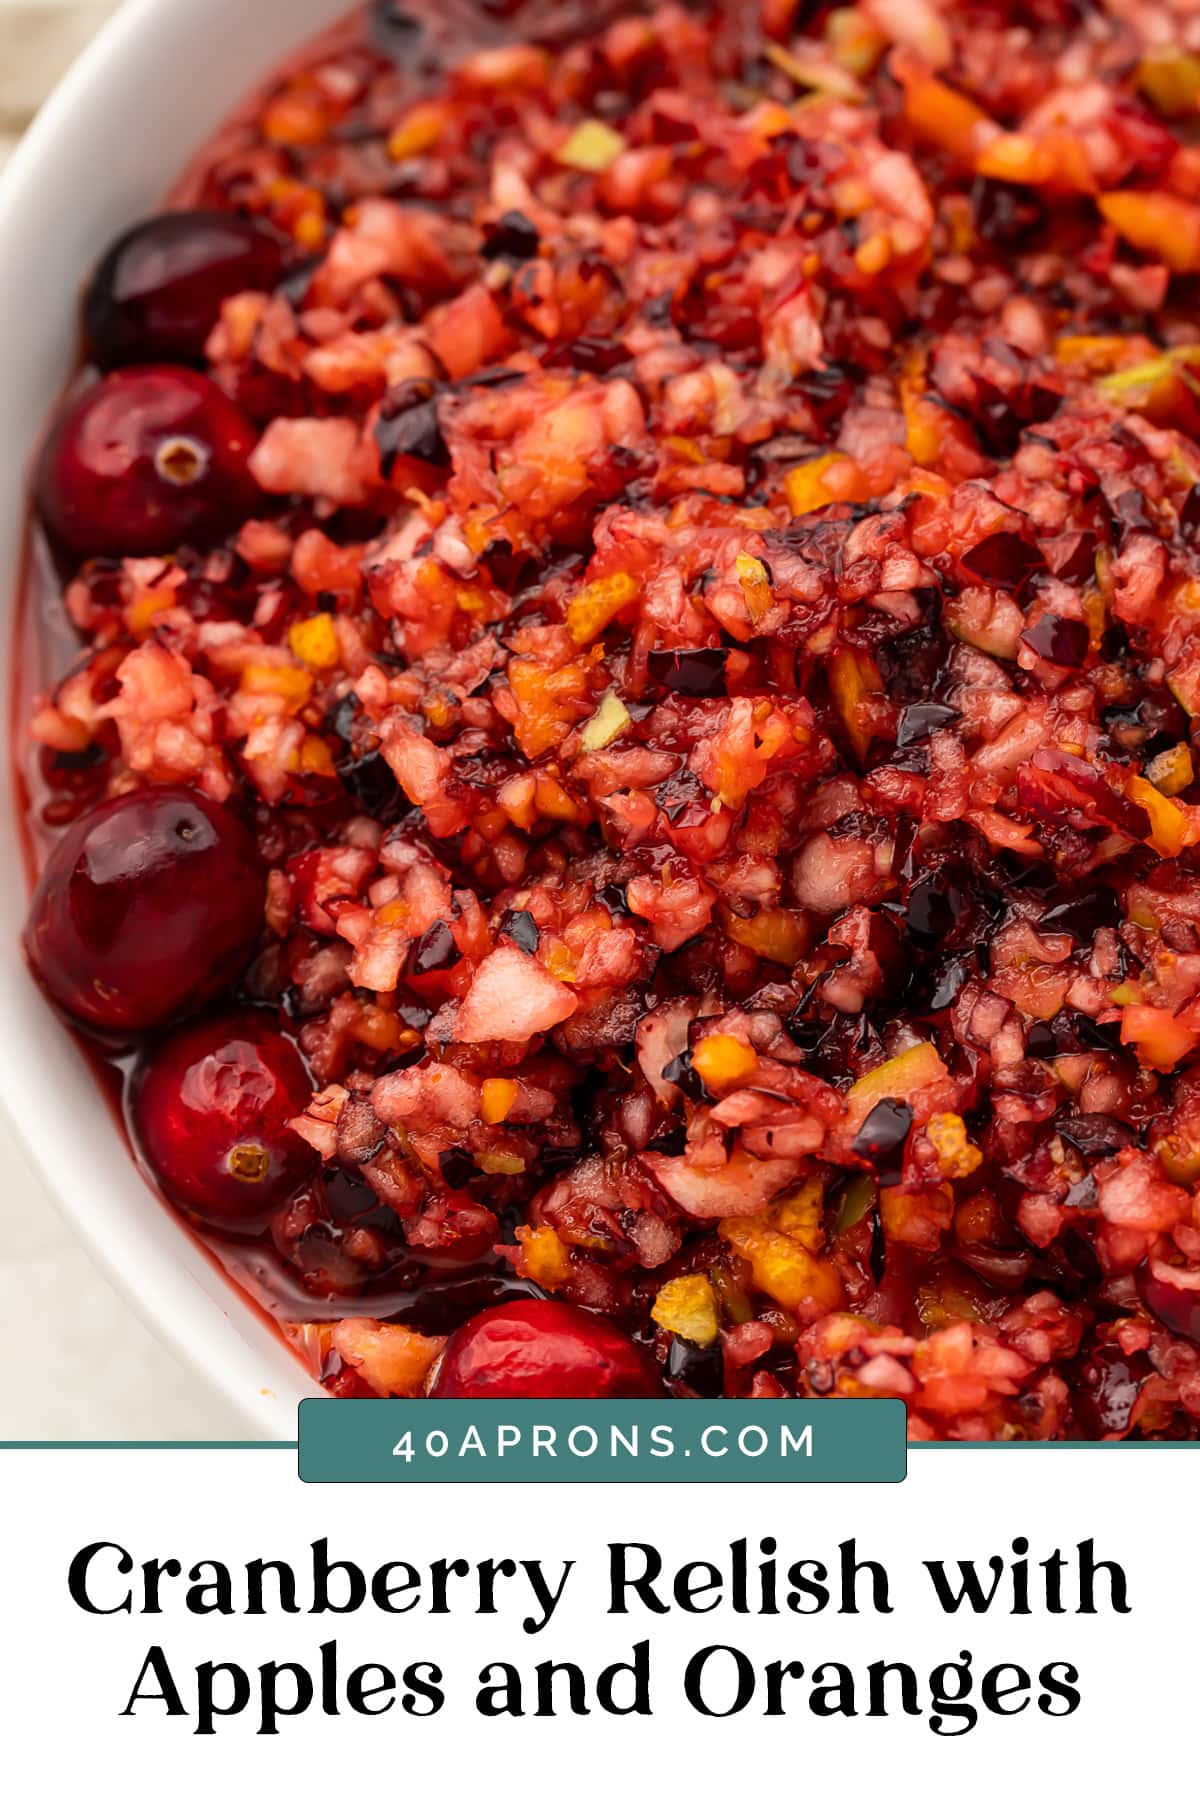 Graphic for Cranberry Relish with apples and oranges.